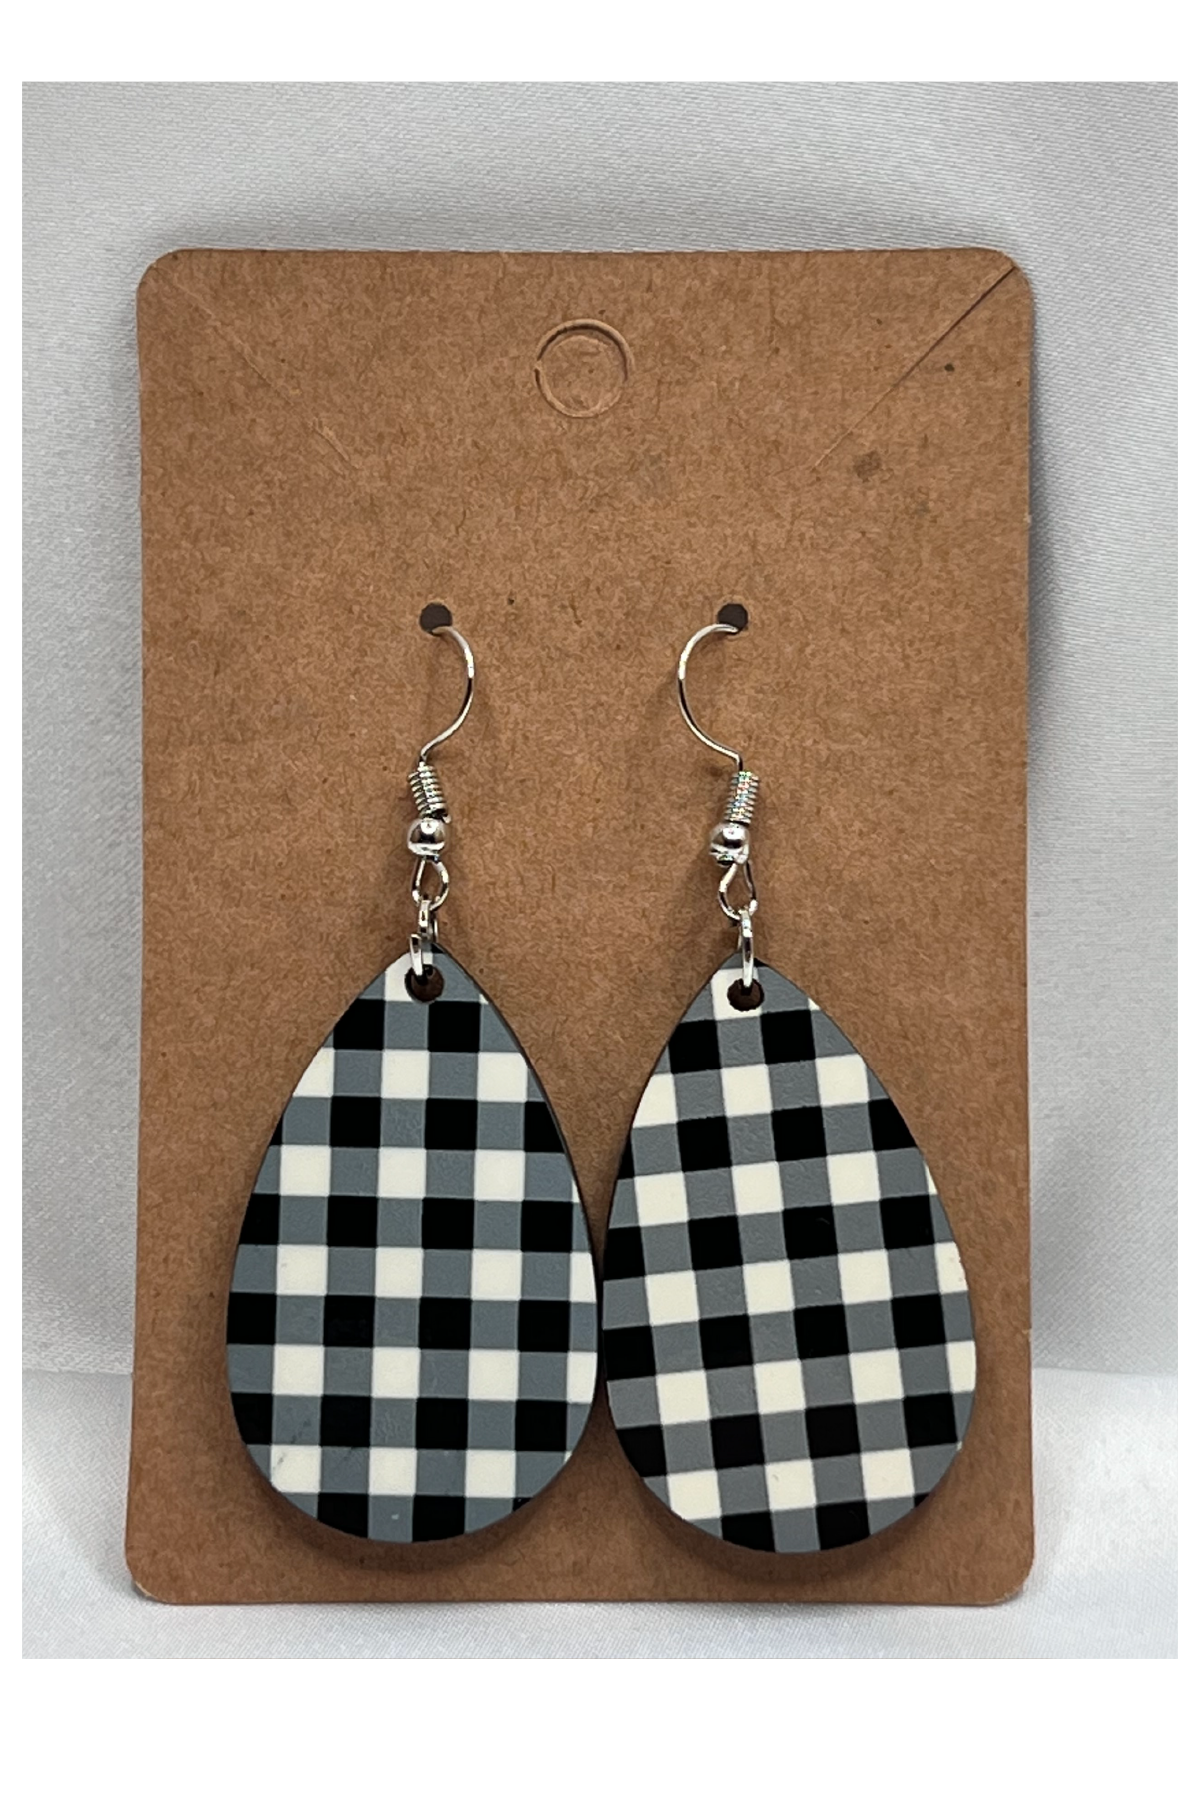 Elegant Checkered Earrings for a Stylish Look